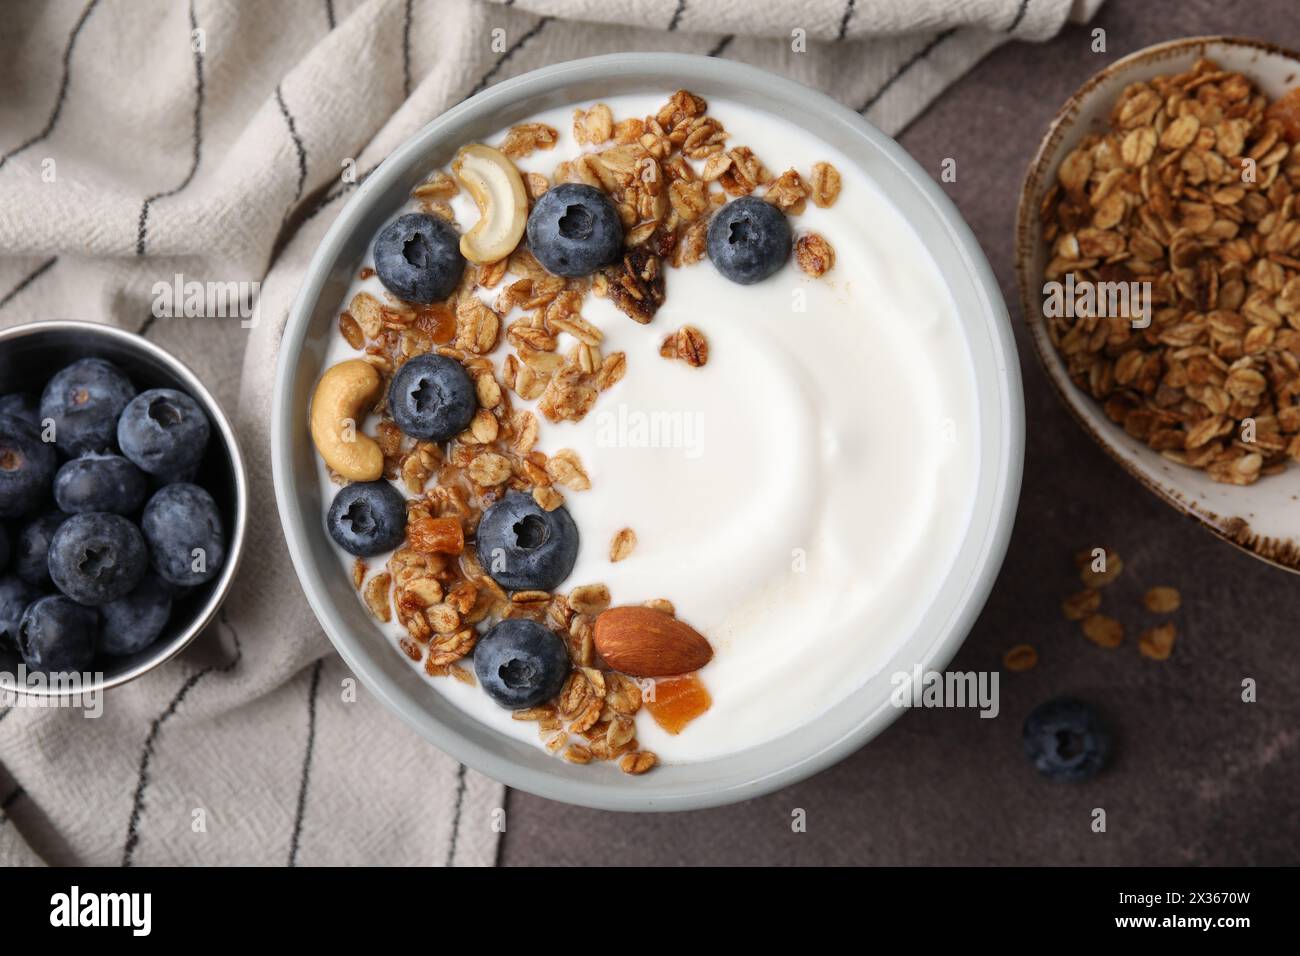 Bowl with yogurt, blueberries and granola on grey table, top view Stock Photo